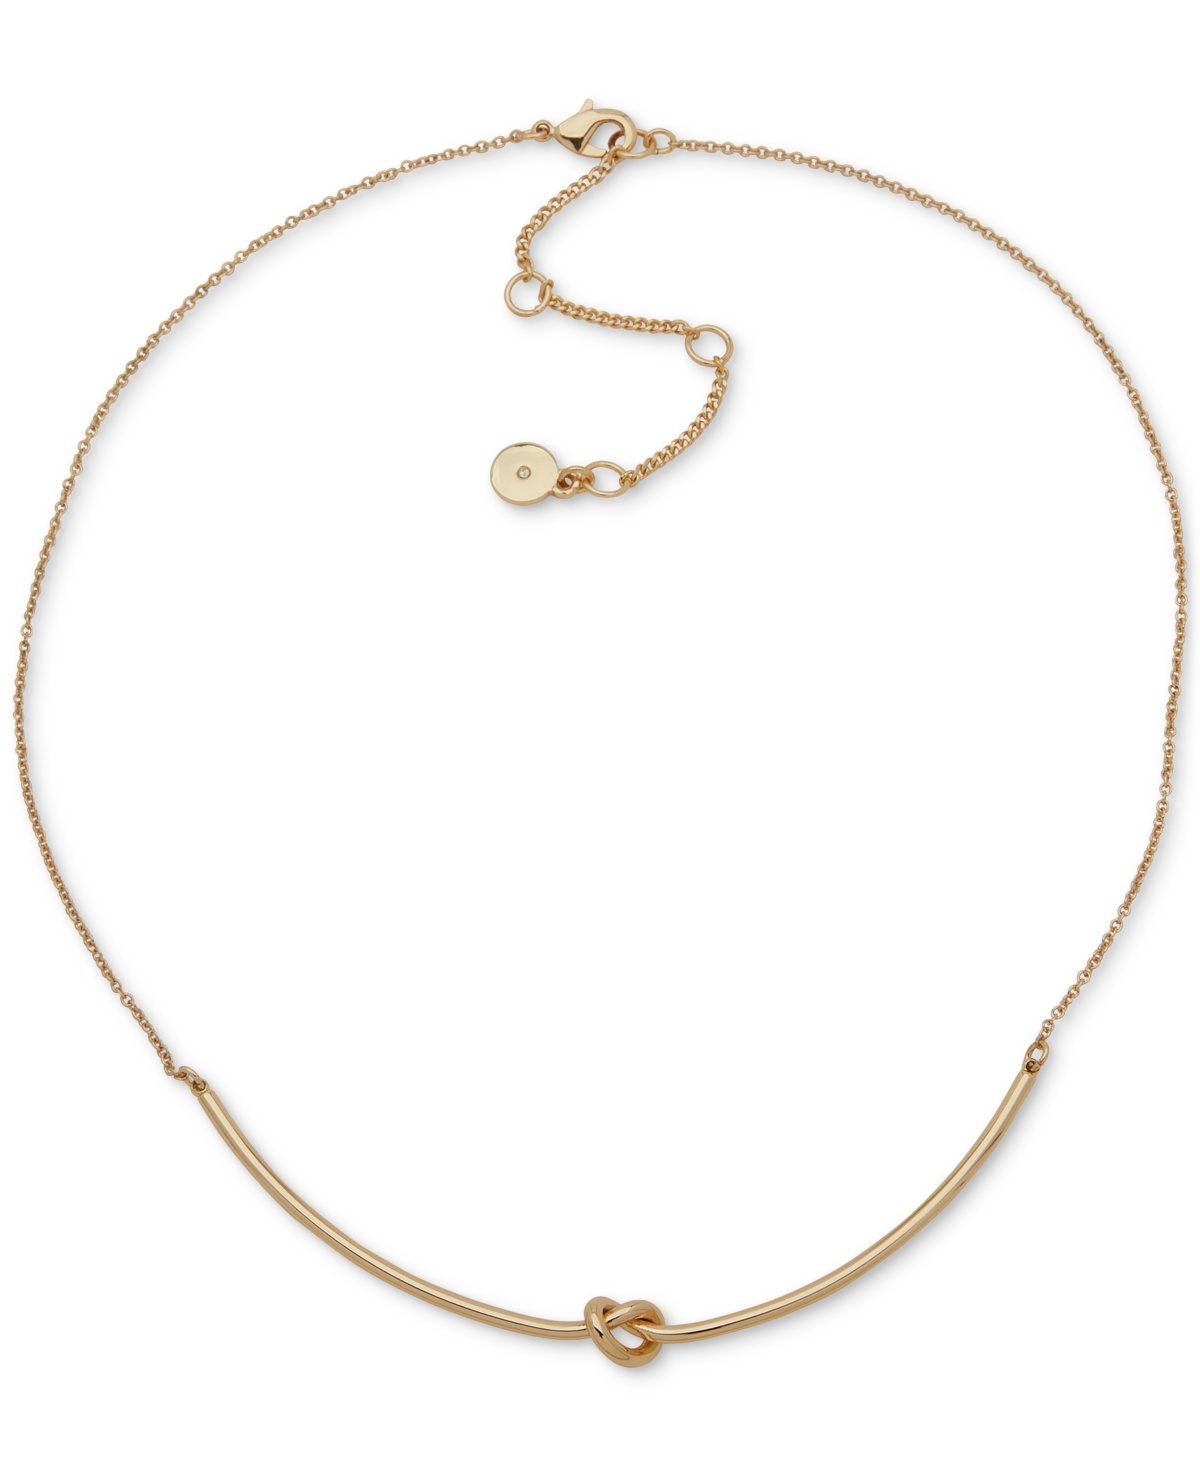 Gold-Tone Knotted Bar Statement Necklace, 16" + 3" extender - Gold